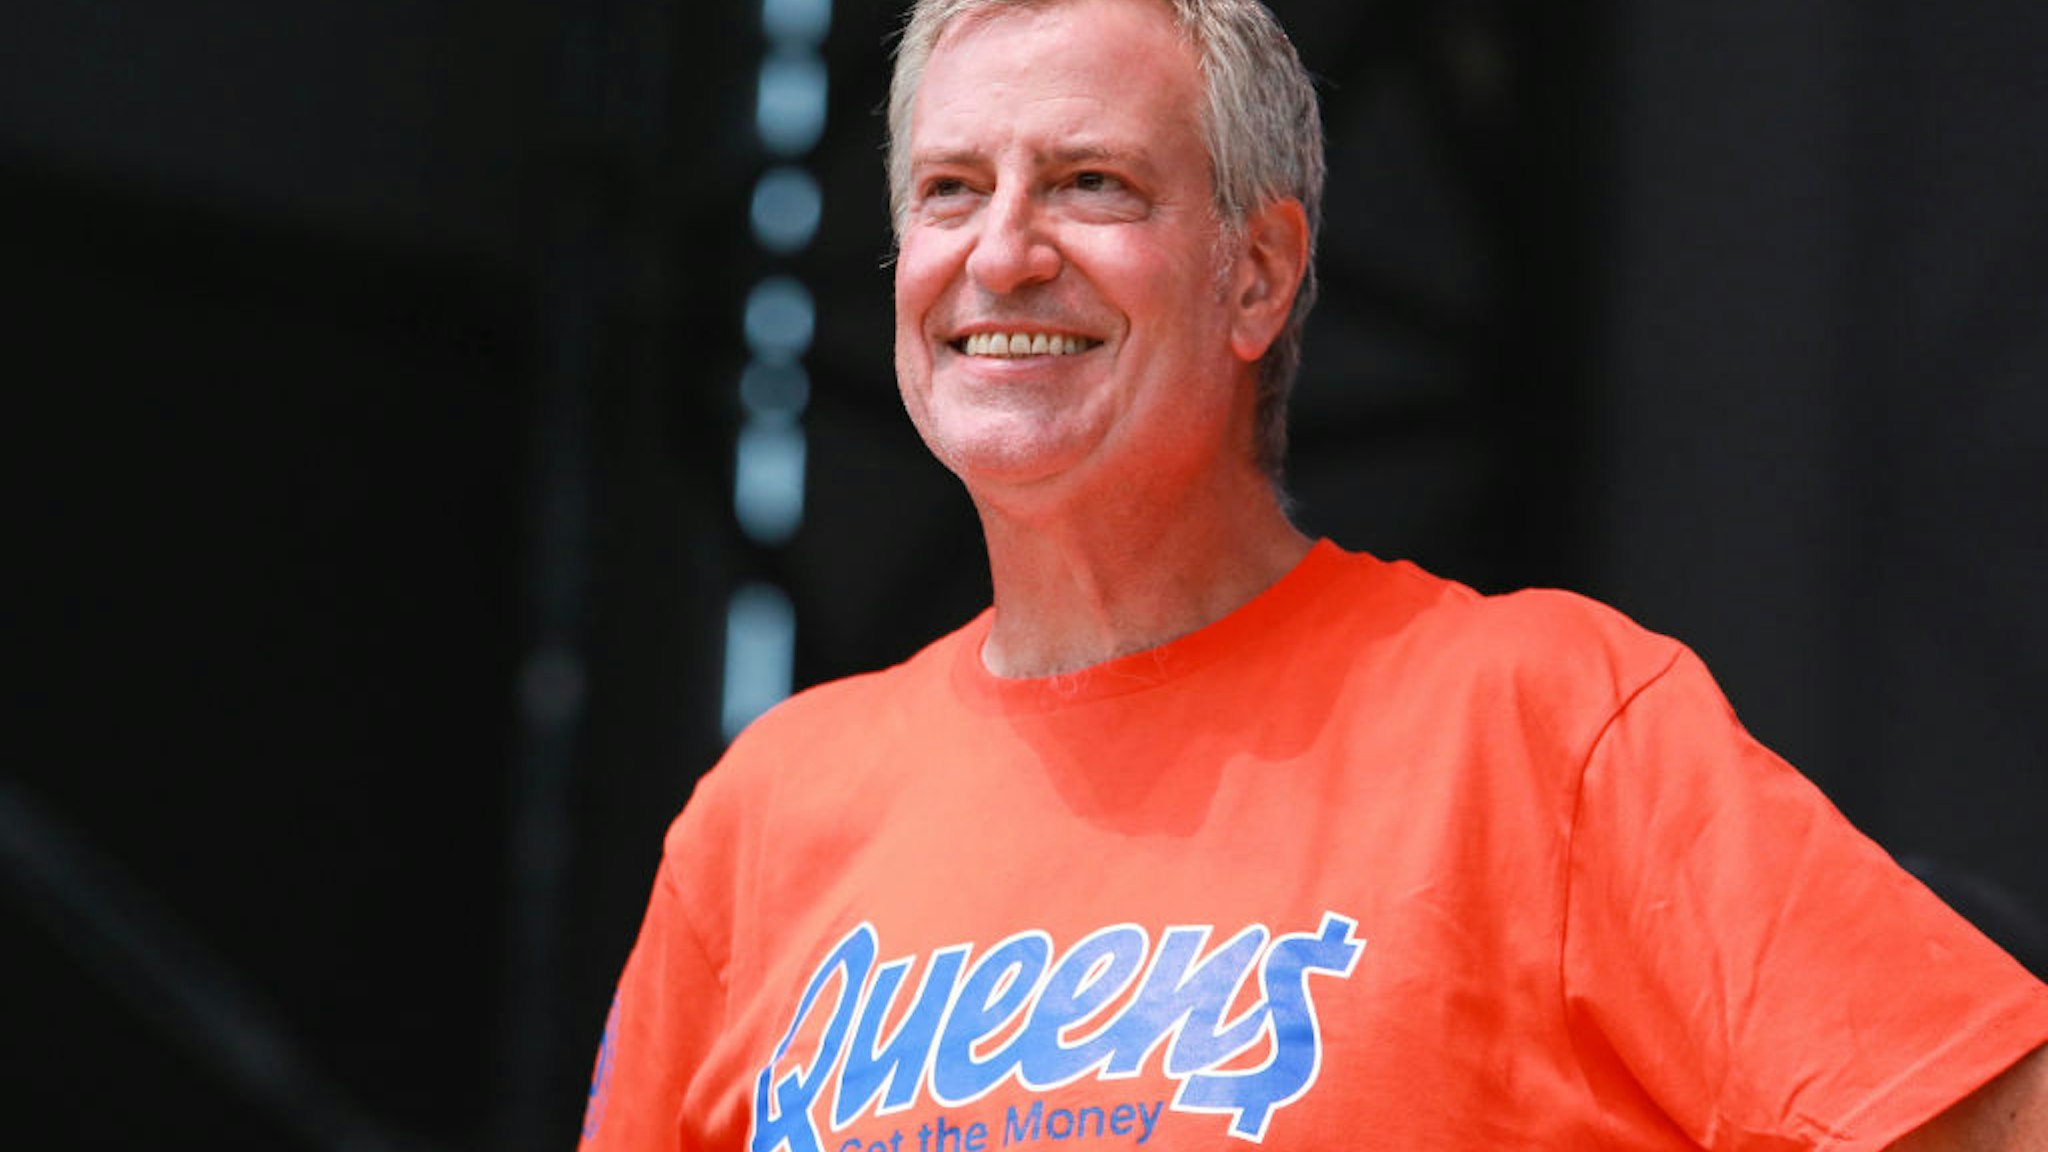 NEW YORK, NEW YORK - AUGUST 20: Bill de Blasio attends It's Time For Hip Hop In NYC: Queens at Forest Hills Stadium on August 20, 2021 in New York, New York. (Photo by Jason Mendez/Getty Images)